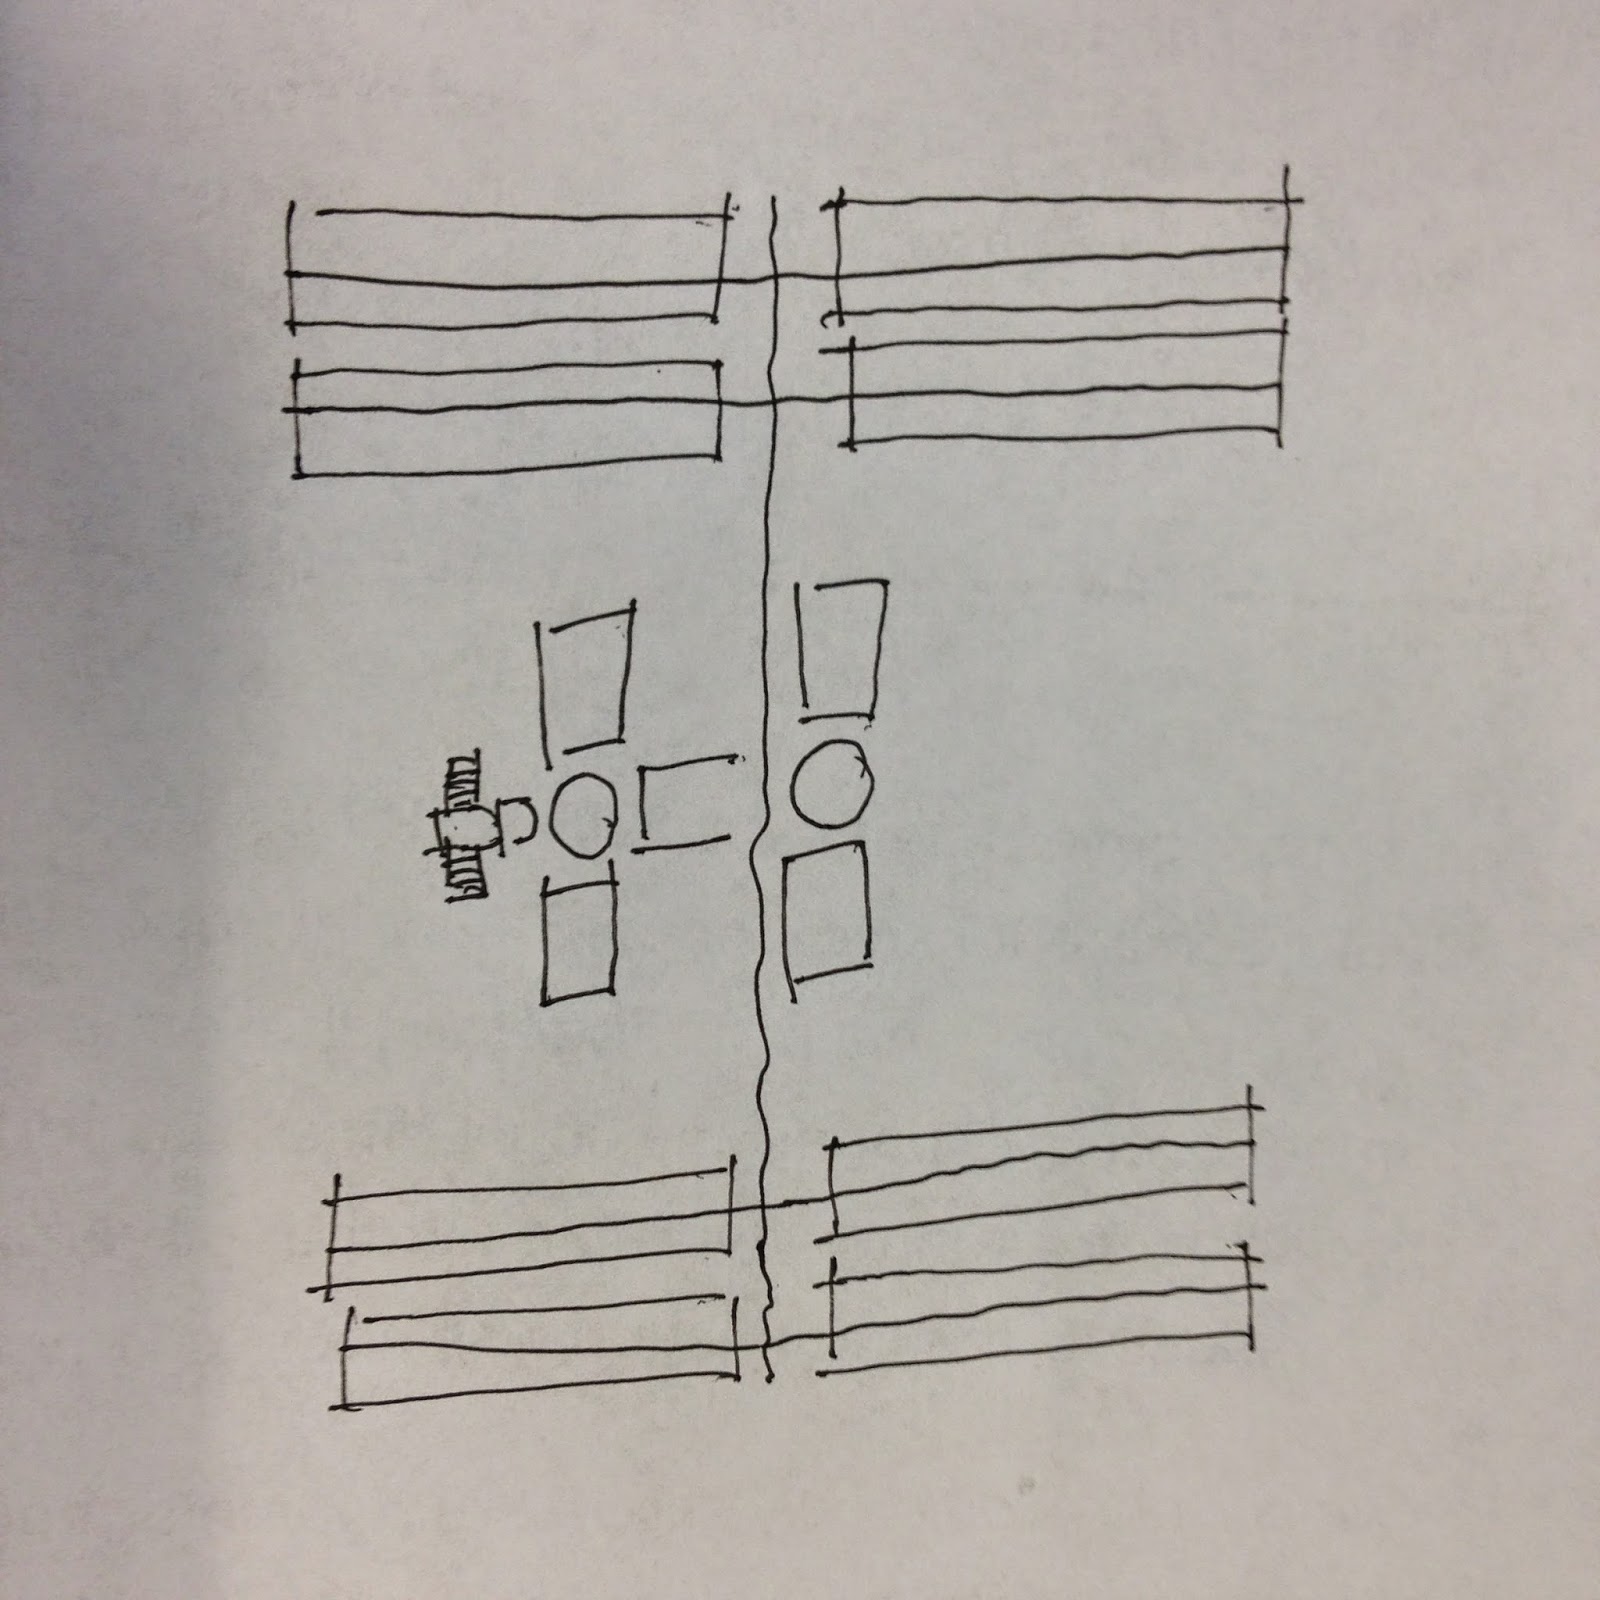 international space station drawing simple